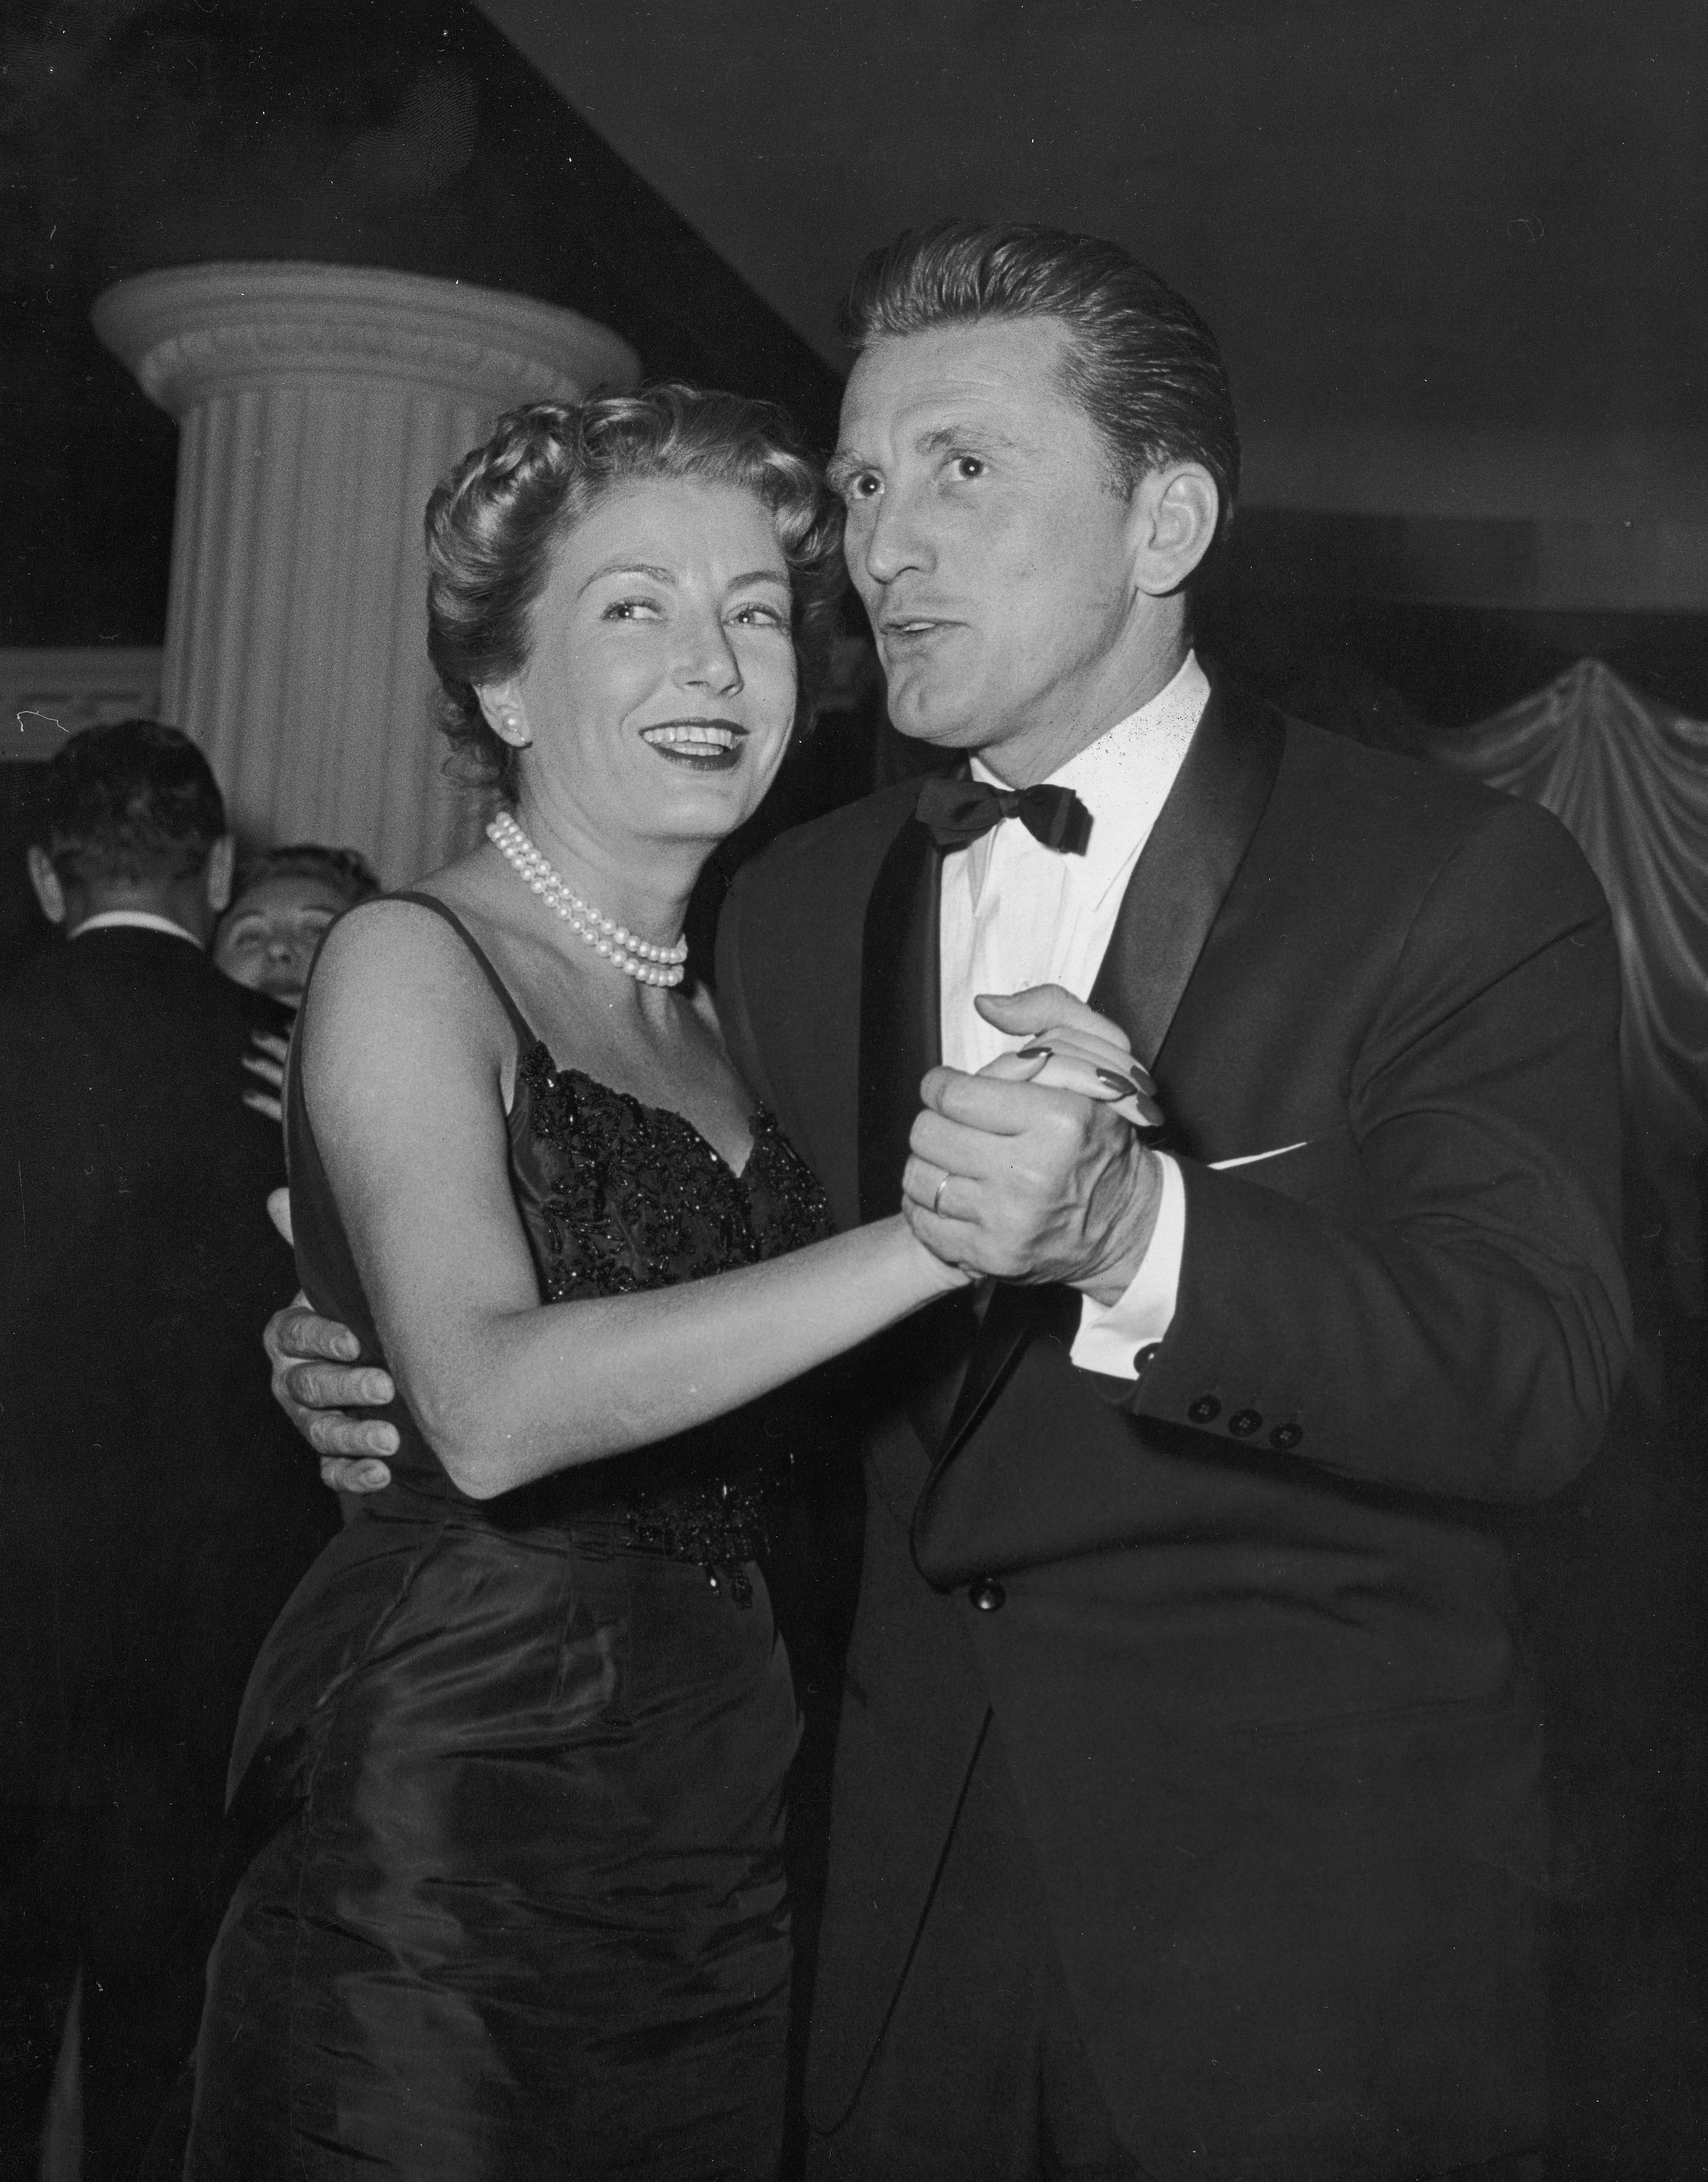 Kirk Douglas and his wife, film producer Anne Buydens, dancing at a club in New York City in 1955. / Source: Getty Images